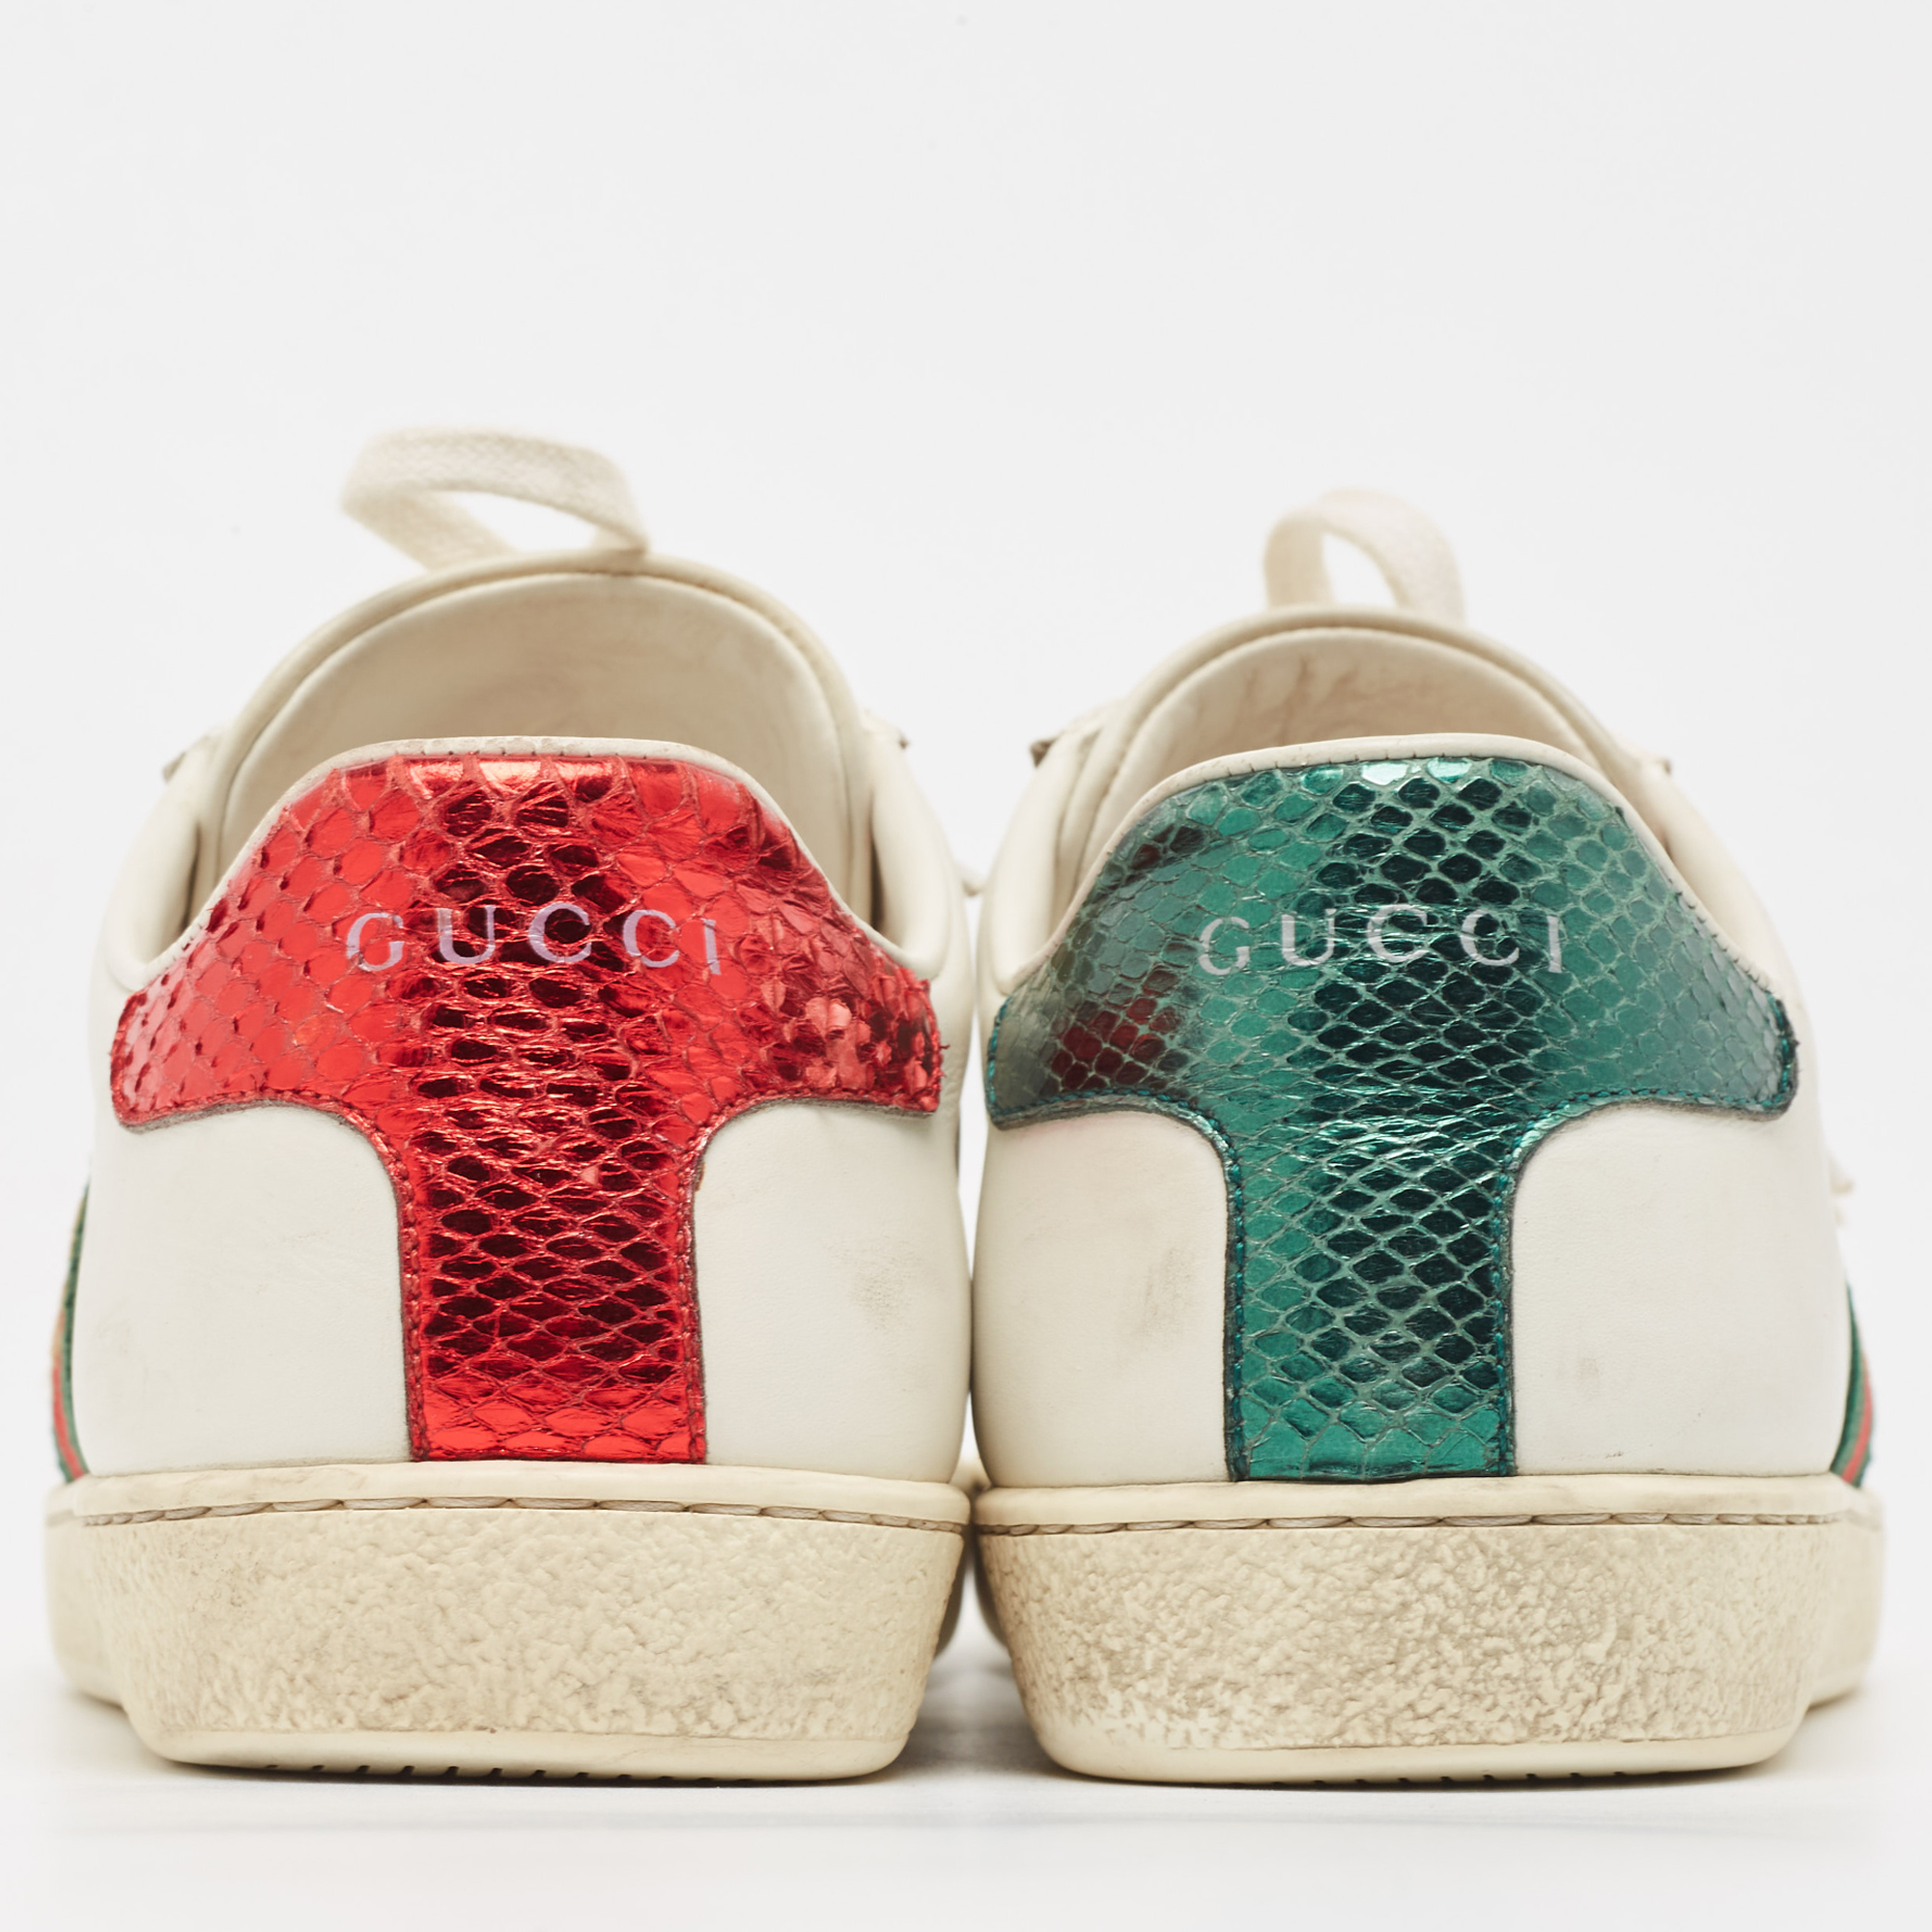 Gucci White Leather Ace Low Top Sneakers Size 36